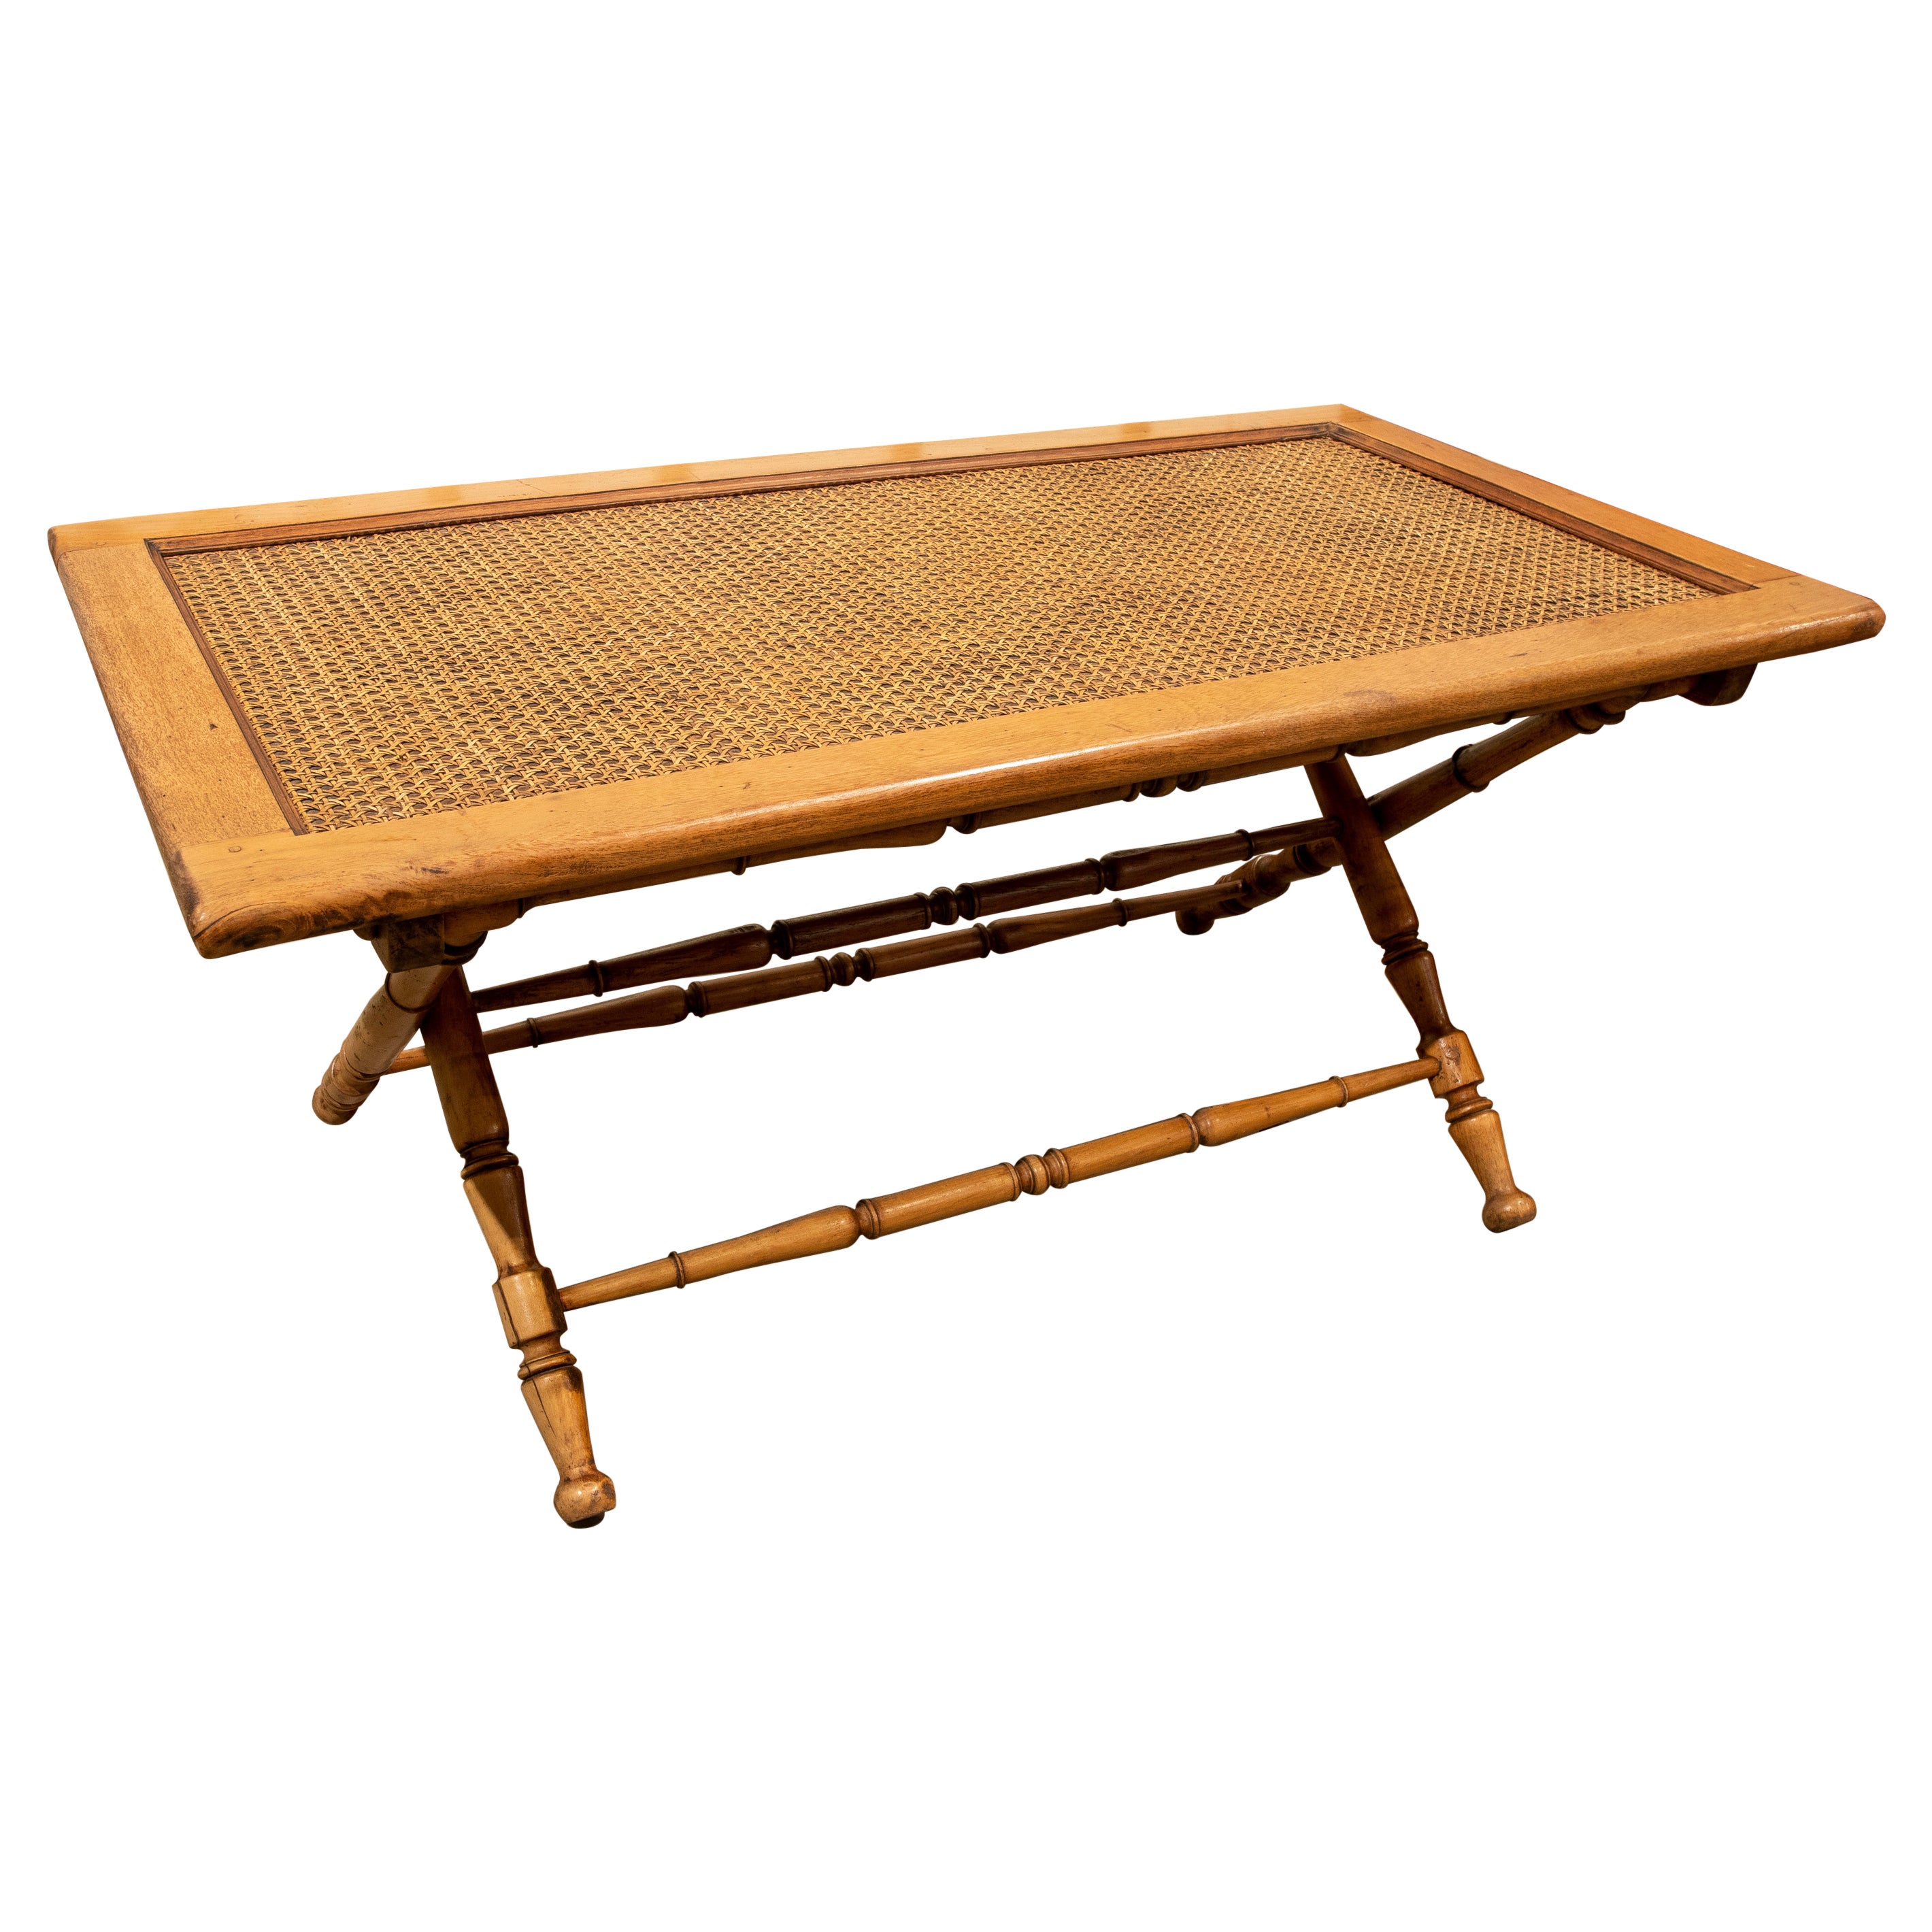 1970s Bamboo Imitation Wooden Coffee Table with Raffia Folding Table 